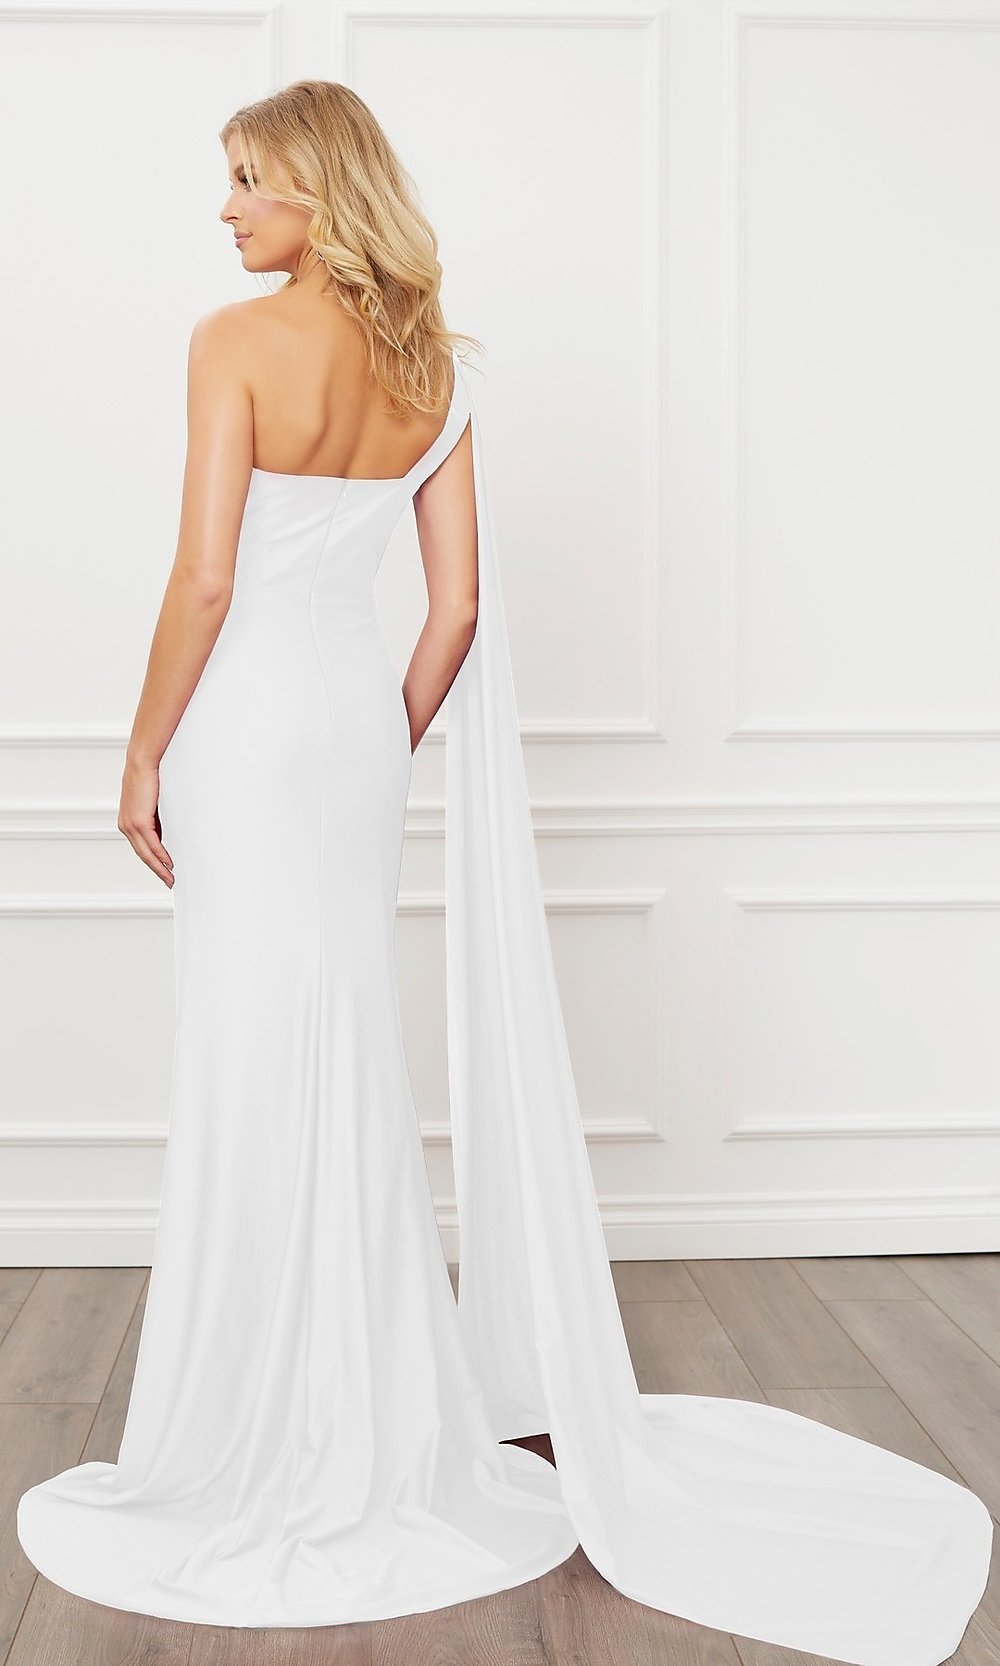 Narianna-White Long Formal Prom Gown with One-Shoulder Cape